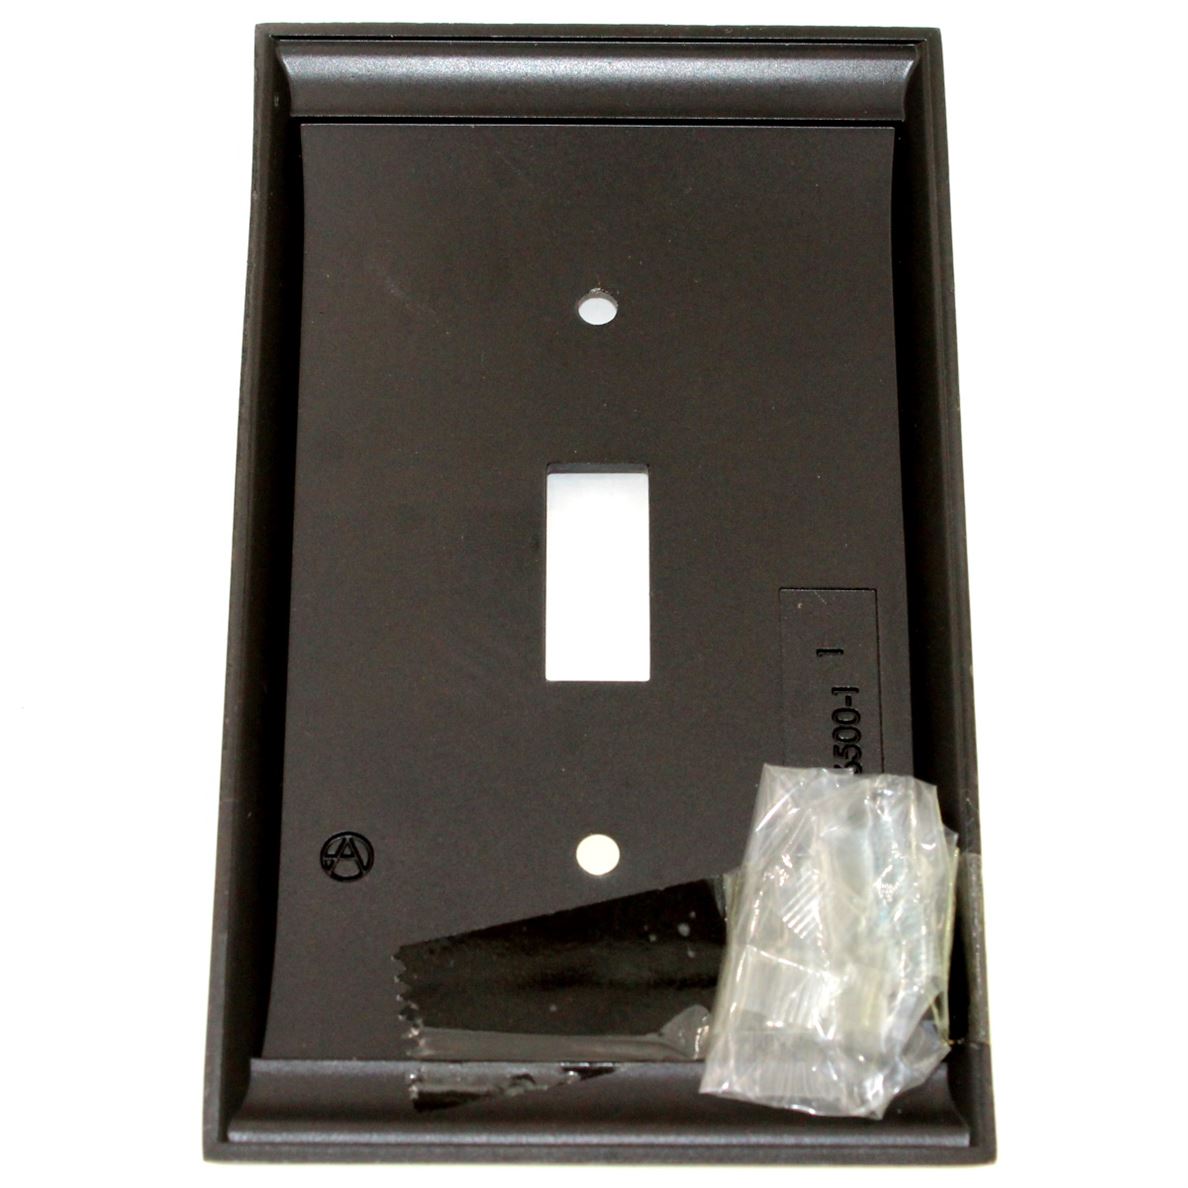 Amerock Candler Oil-Rubbed Bronze 1 Toggle Light Switch Wall Plate BP36500ORB